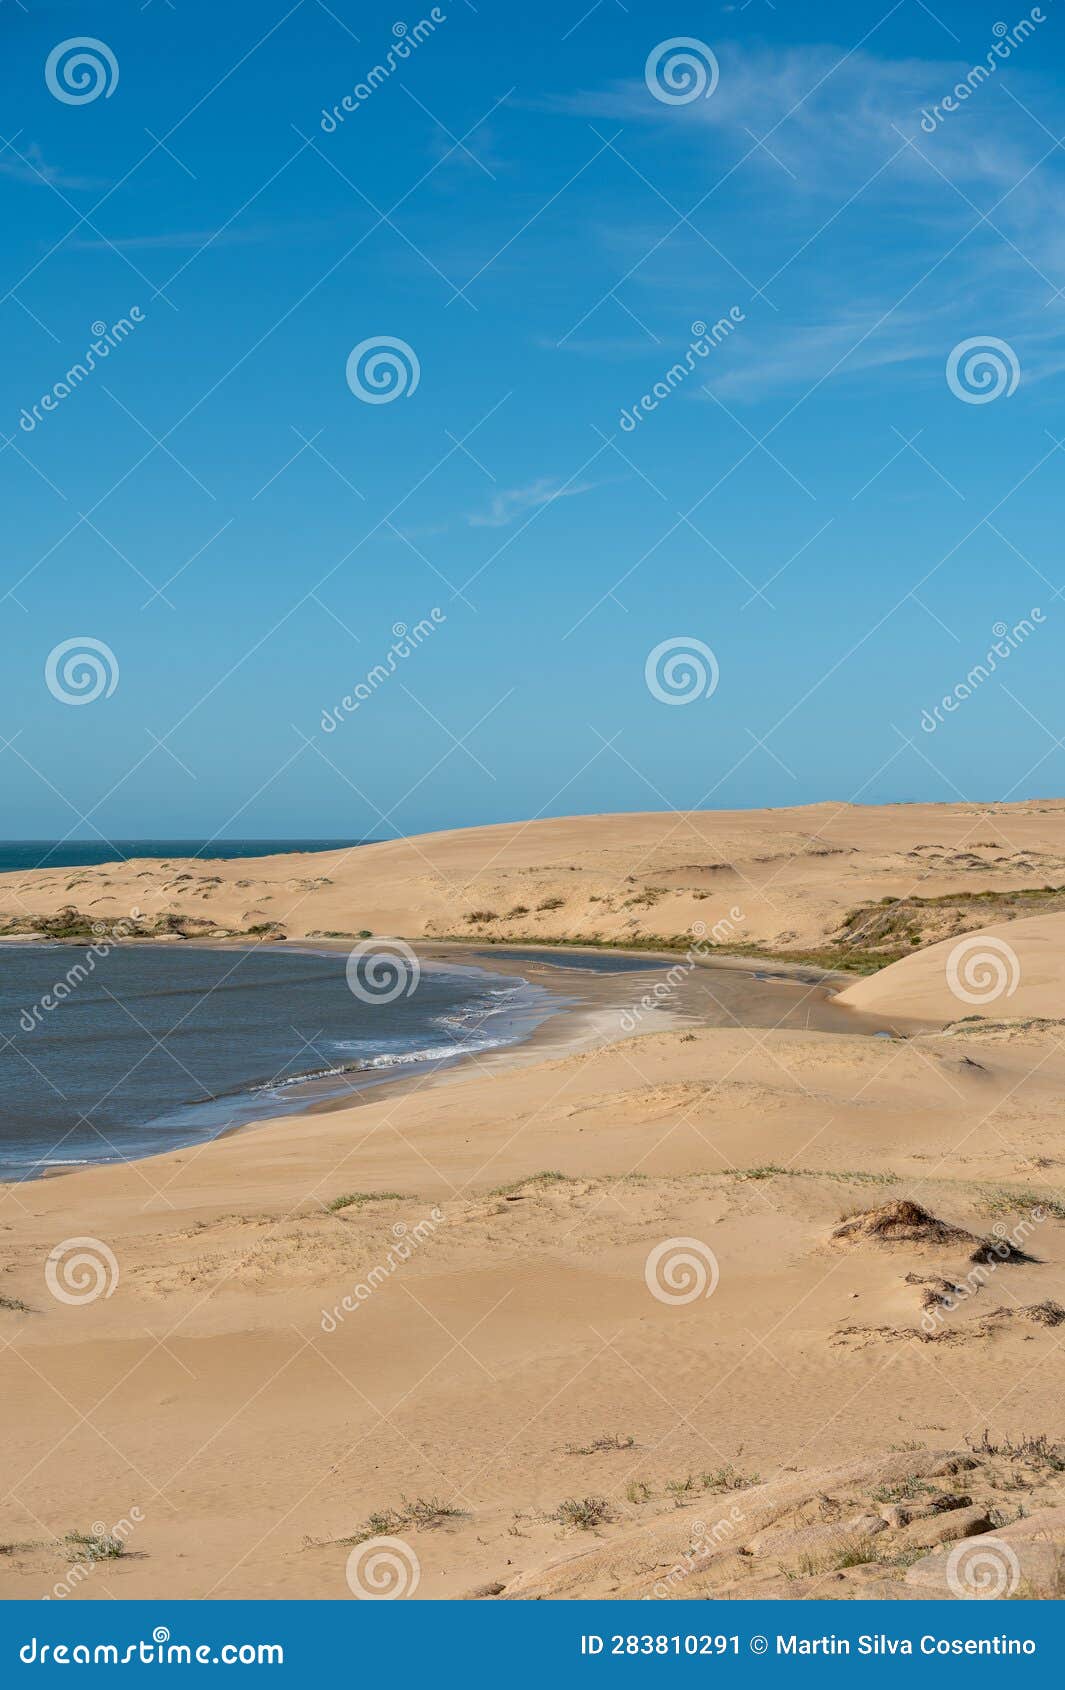 dunes of the cabo polonia national park in the department of rocha in uruguay